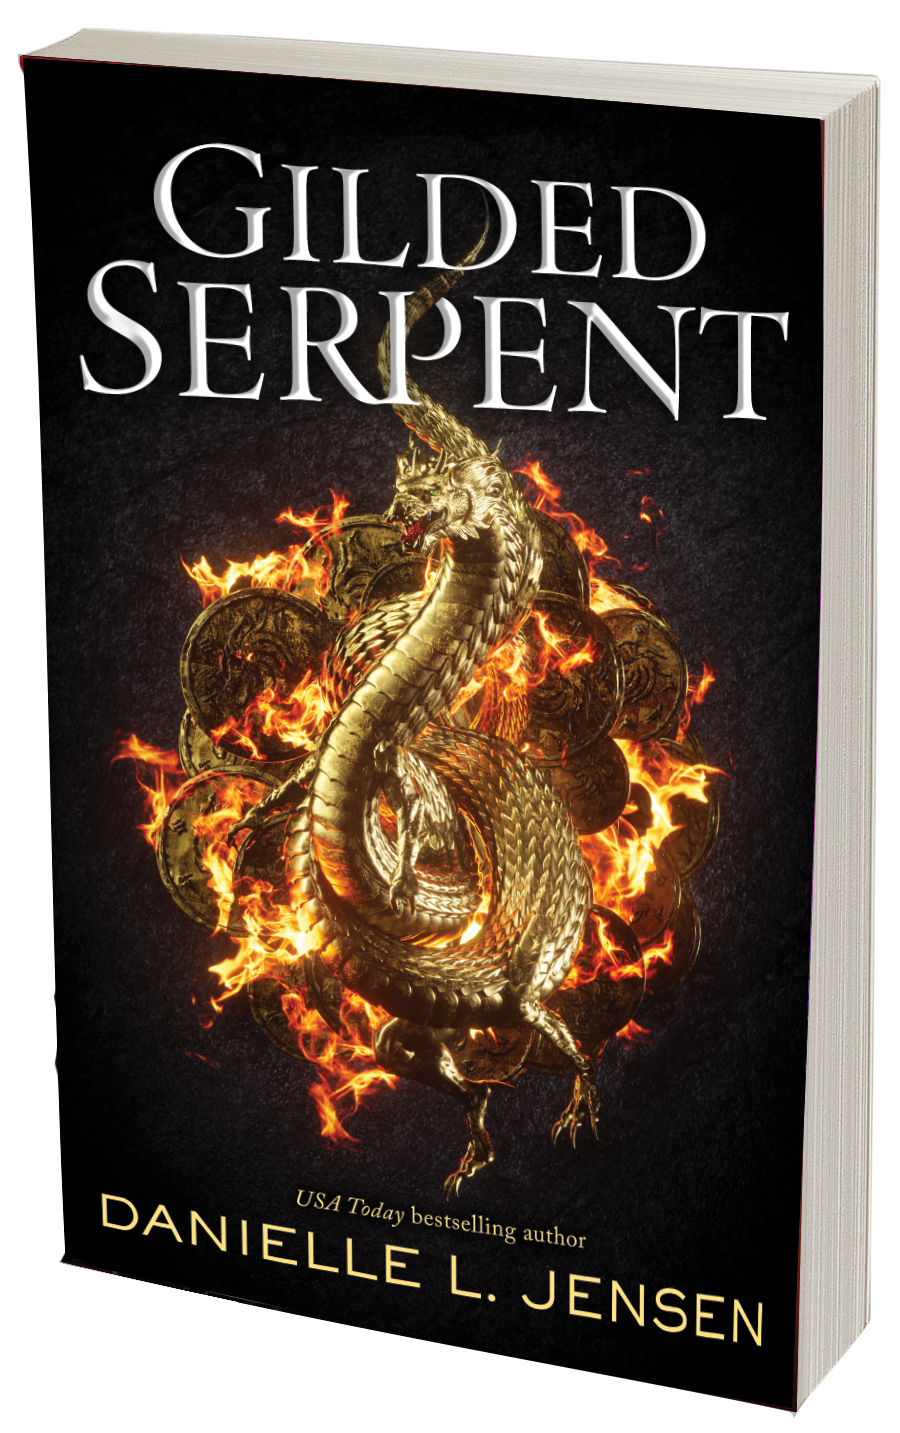 paperback cover of Gilded Serpent by Danielle Jensen